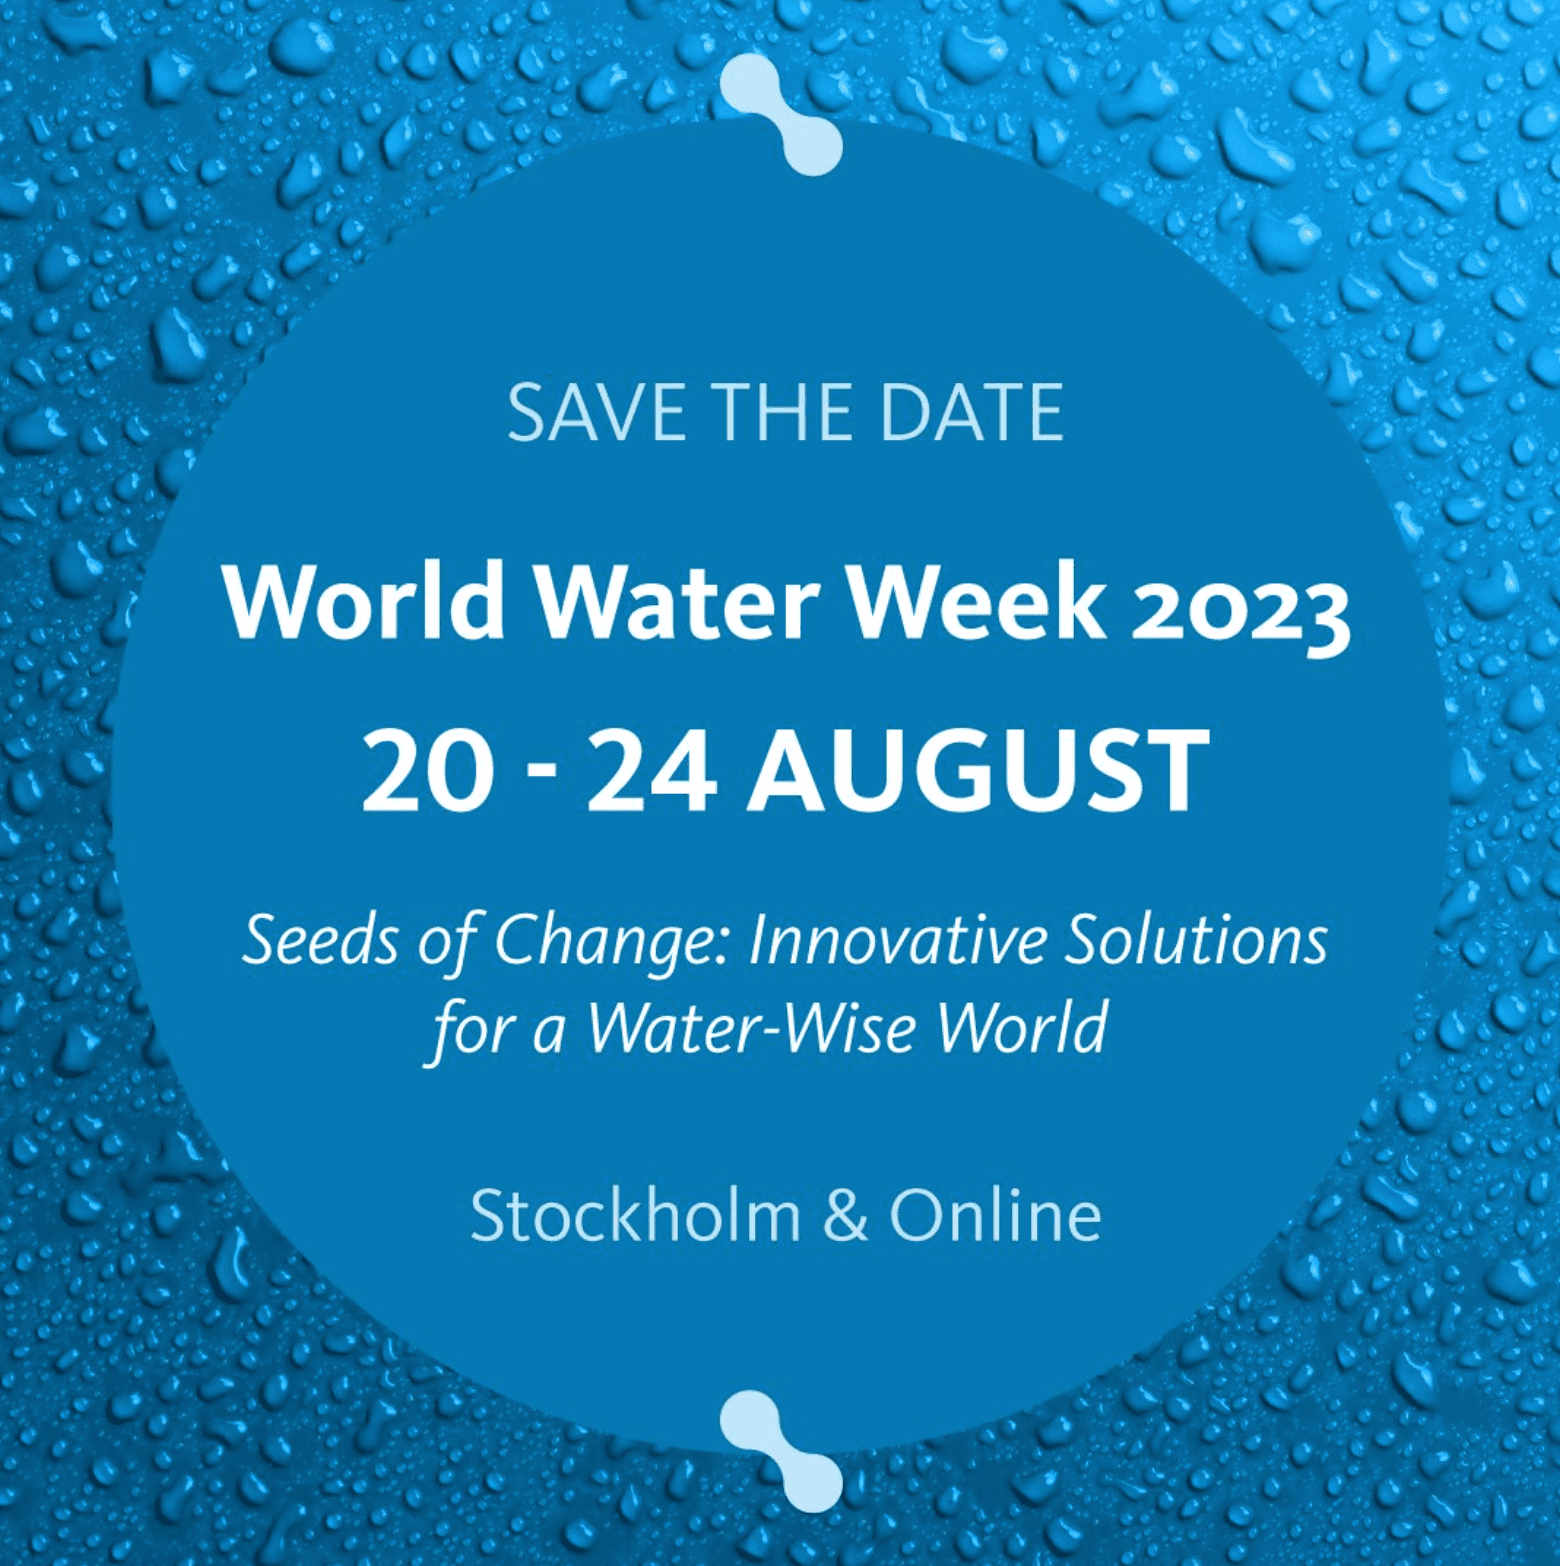 The EIA participated in the World Water Week on Tuesday 22 August